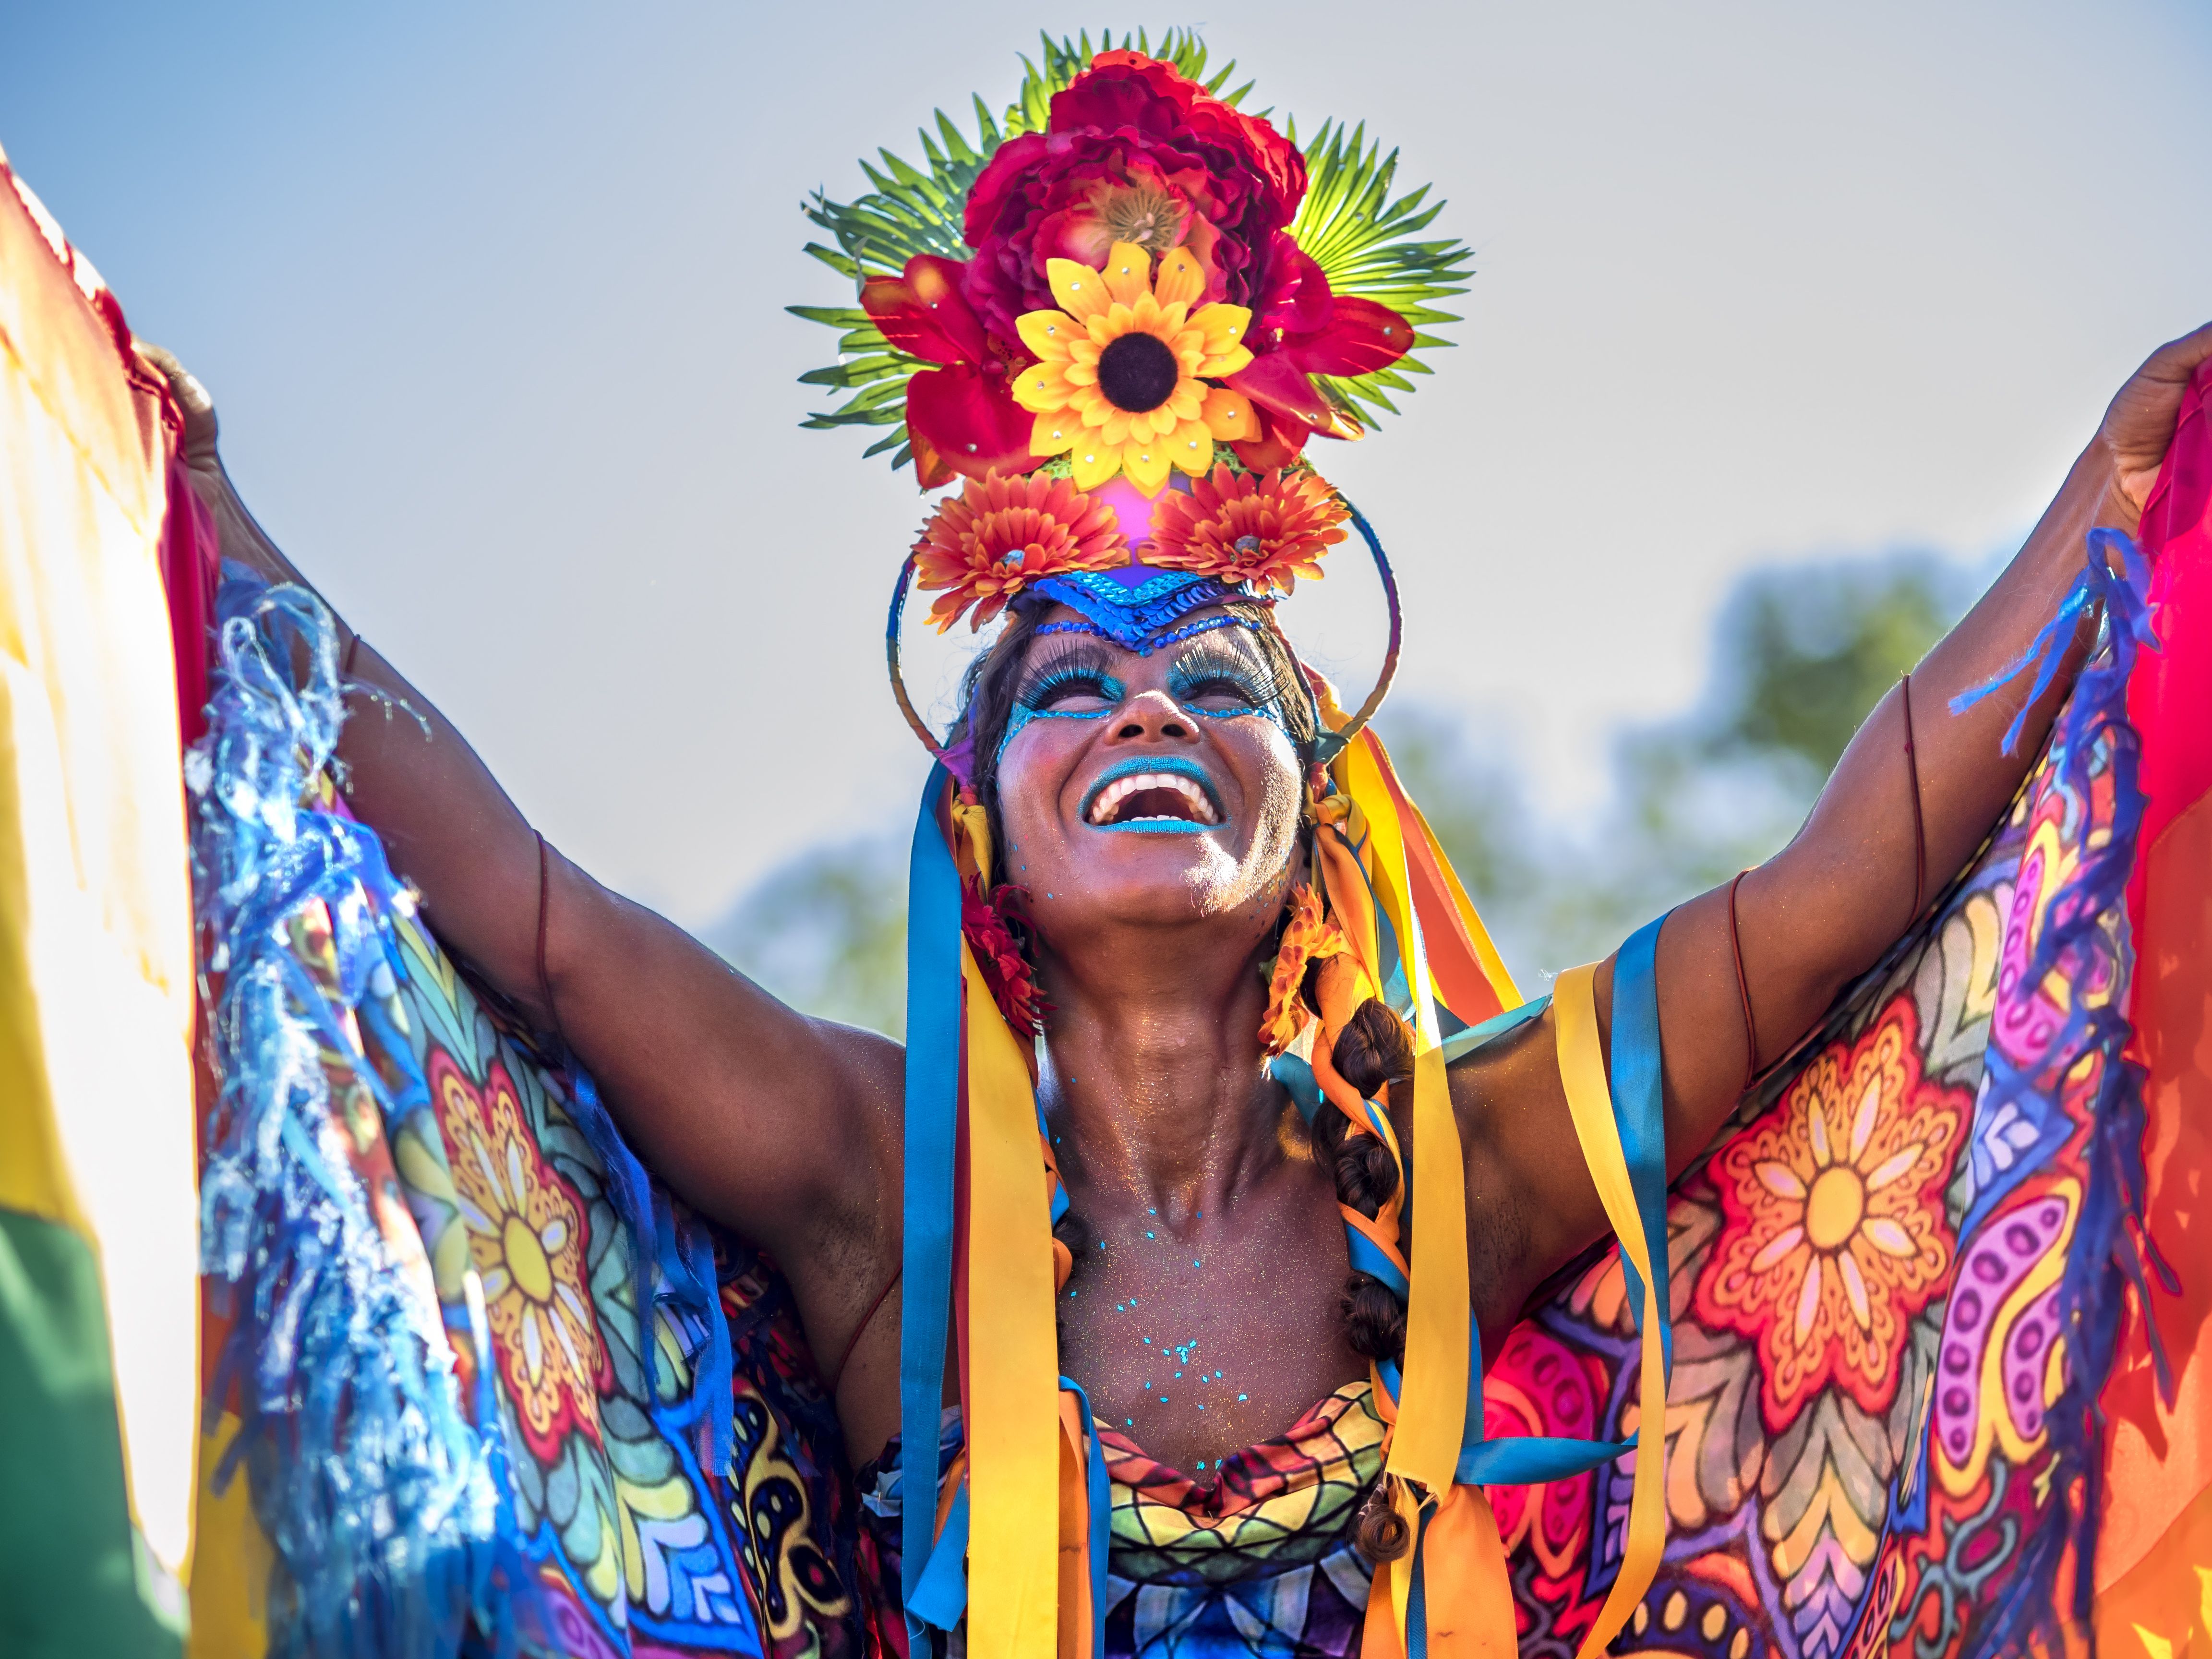 Woman wearing colorful costume and smiling during Carnaval street parade in Rio de Janeiro, Brazil